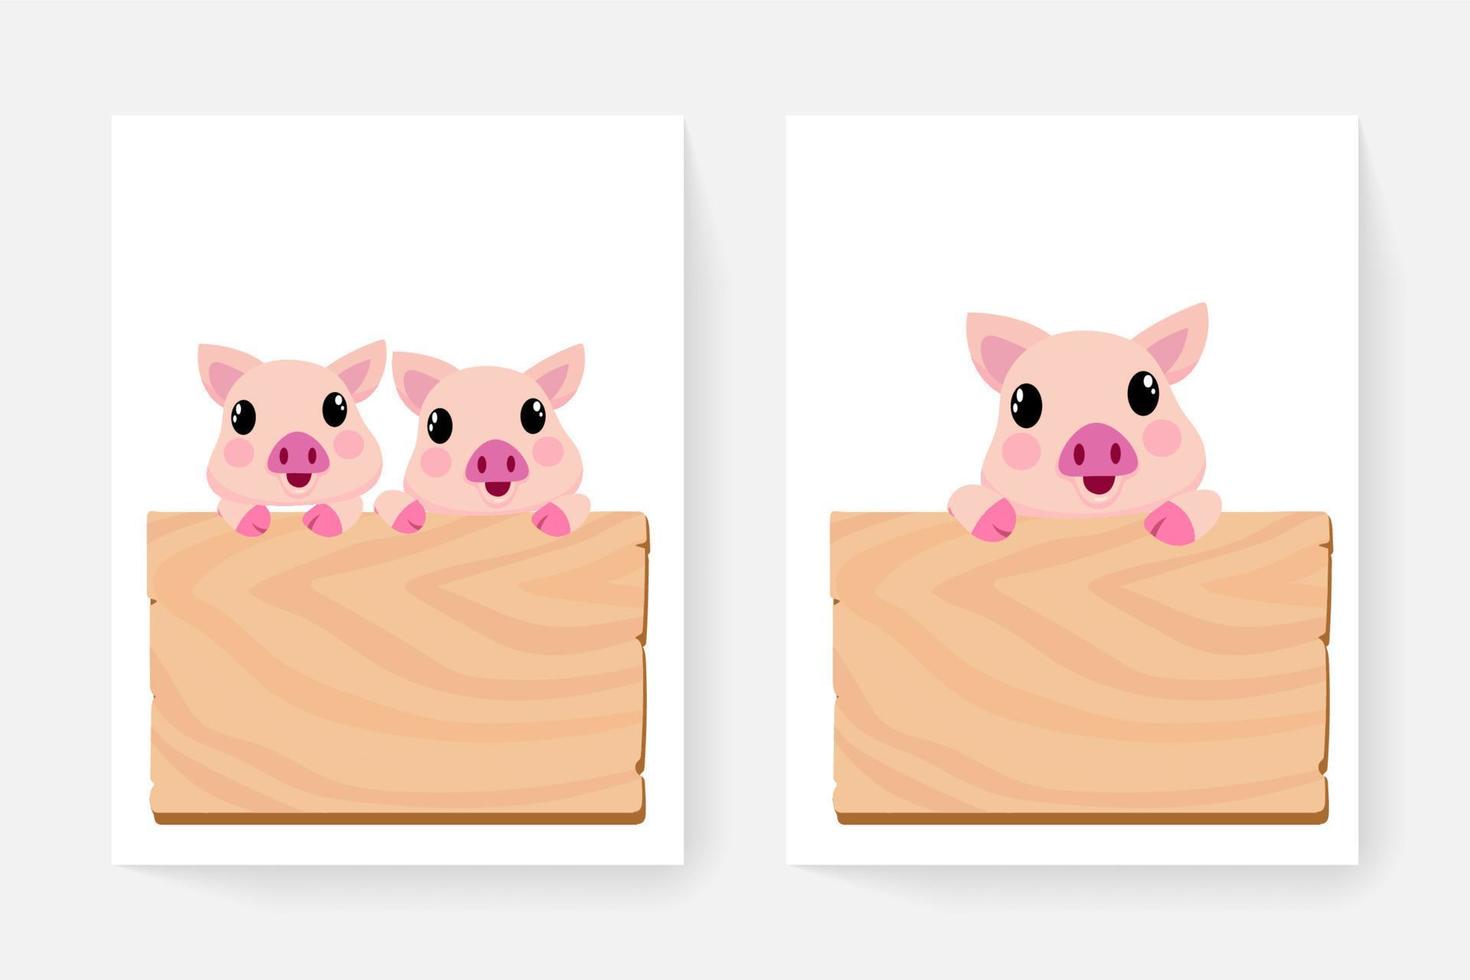 Cute animals in ranch, Placards and banner in farms Design for banner, layout, annual report, web, flyer, brochure, ad. vector